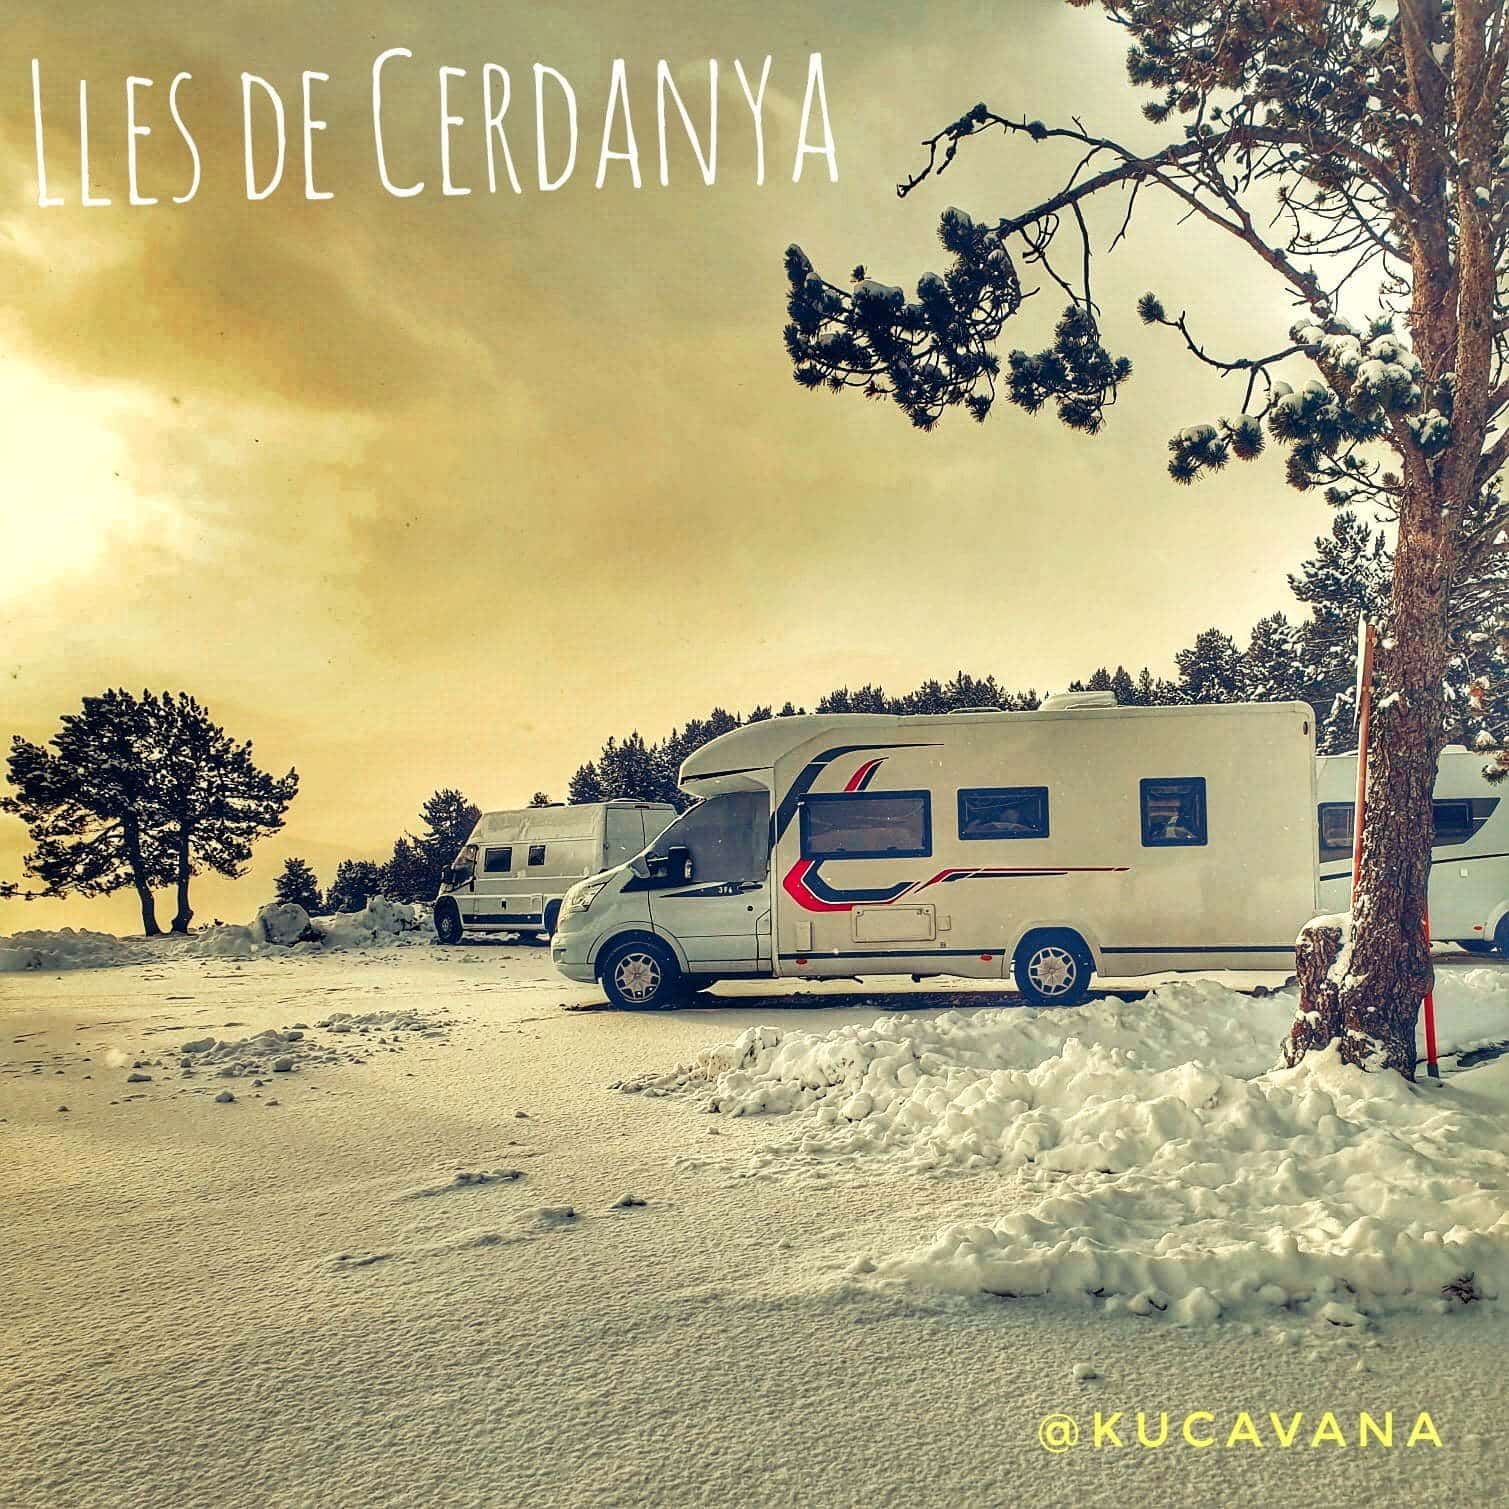 Read more about the article Lles de Cerdanya, the balcony to Cadí. What to see, do, eat and sleep